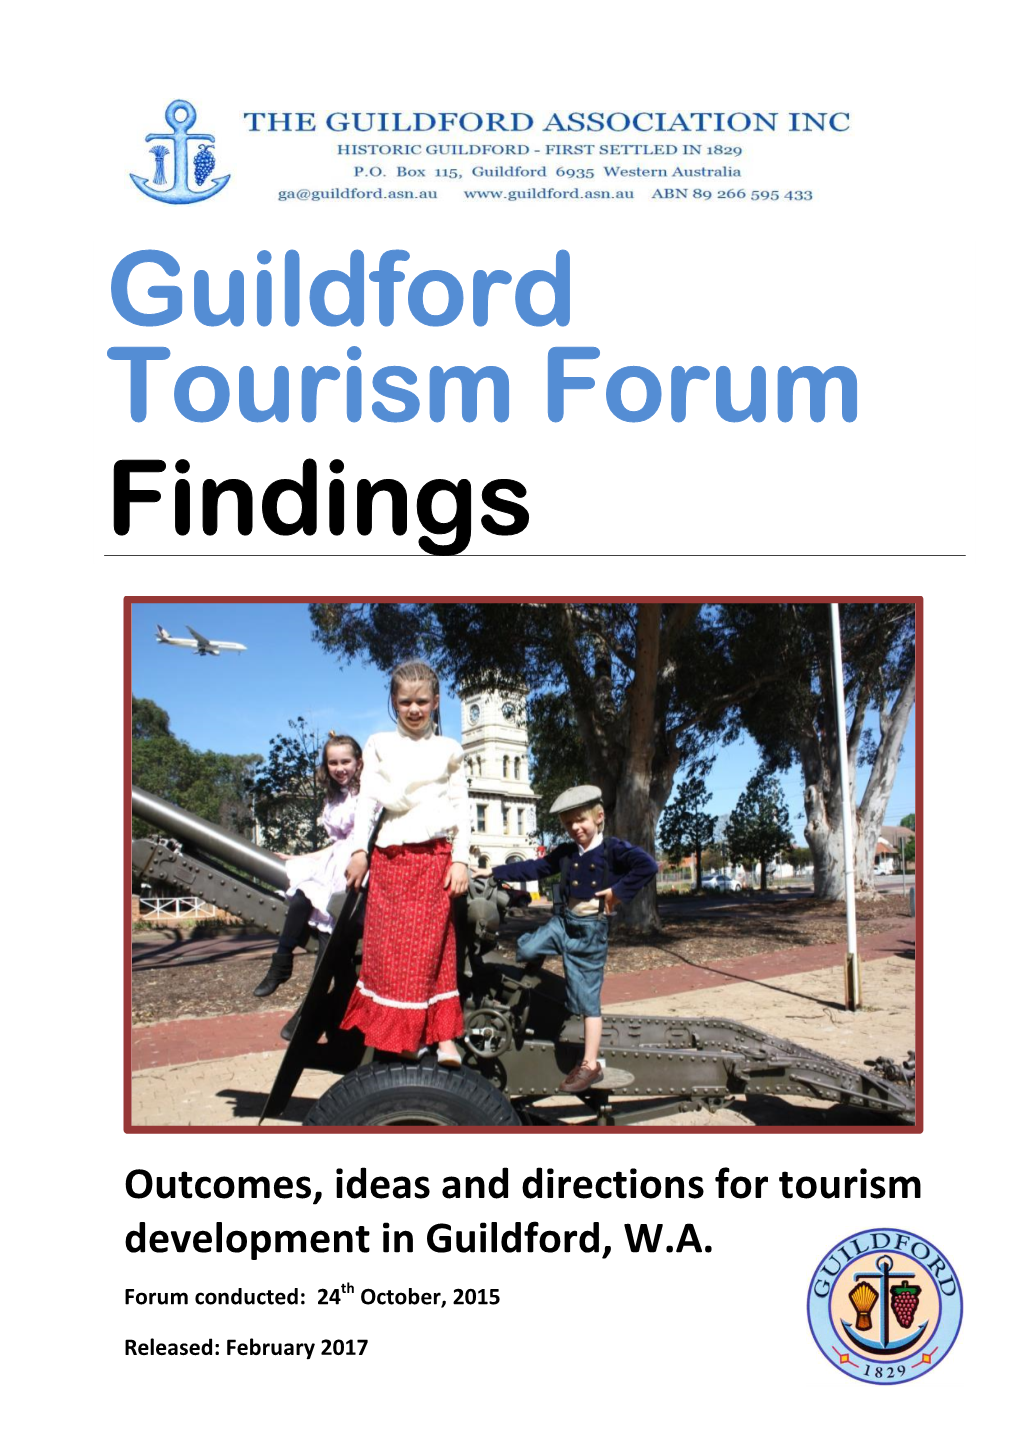 Guildford Tourism Forum Findings Page 2